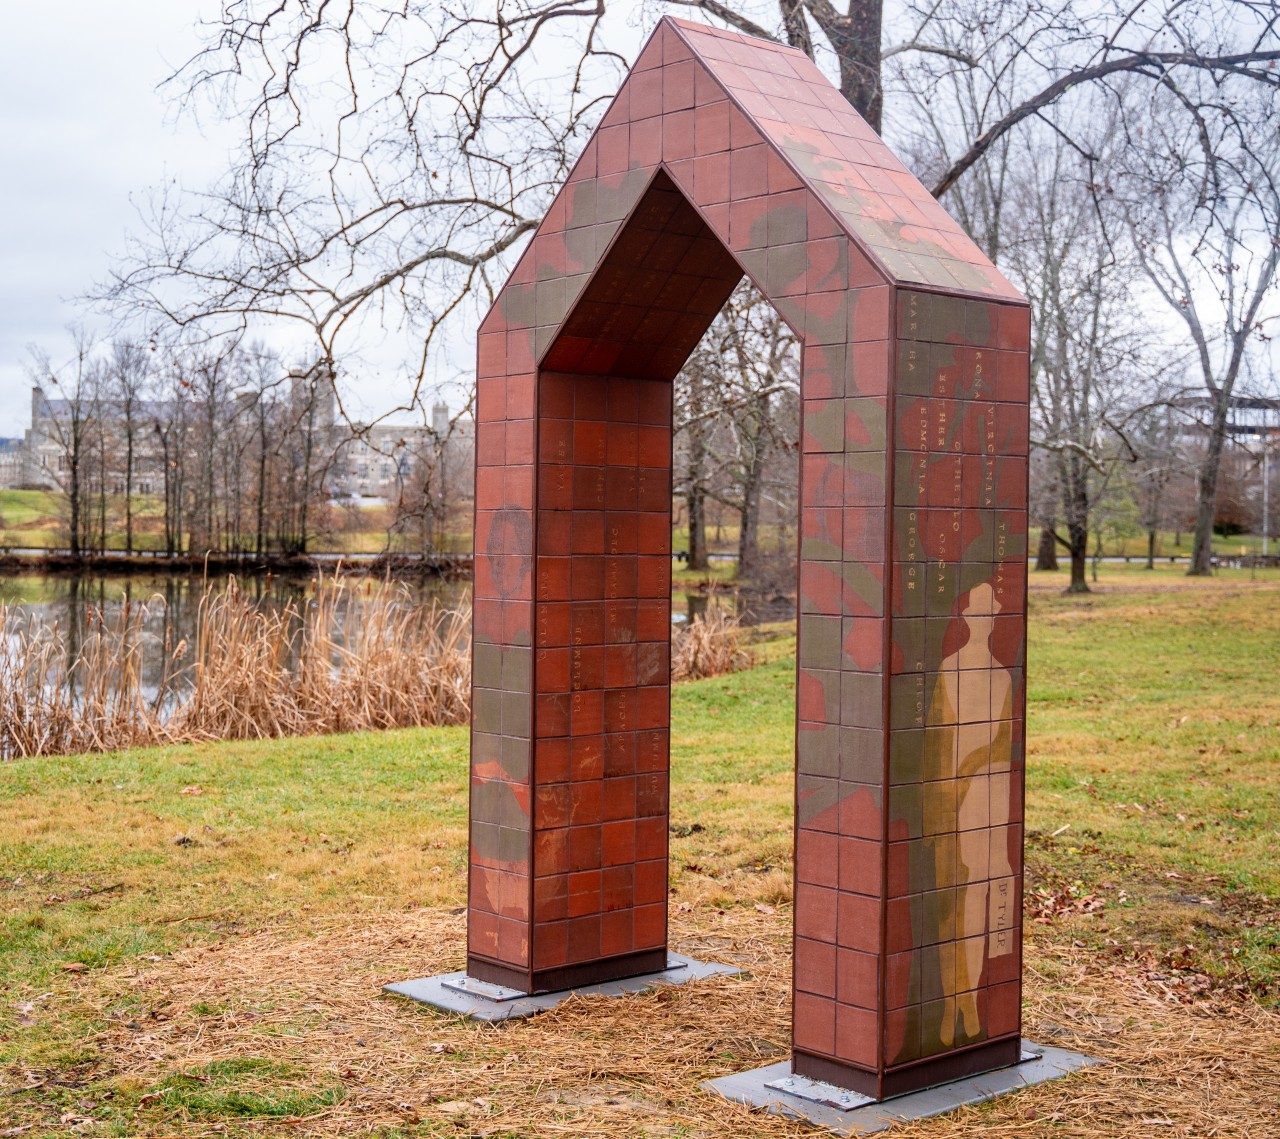 A tiled archway sits on a lawn. To the left of the arch is a pond and trees appear in the background. On the archway are depicted historical imagery of Virginia Tech. 